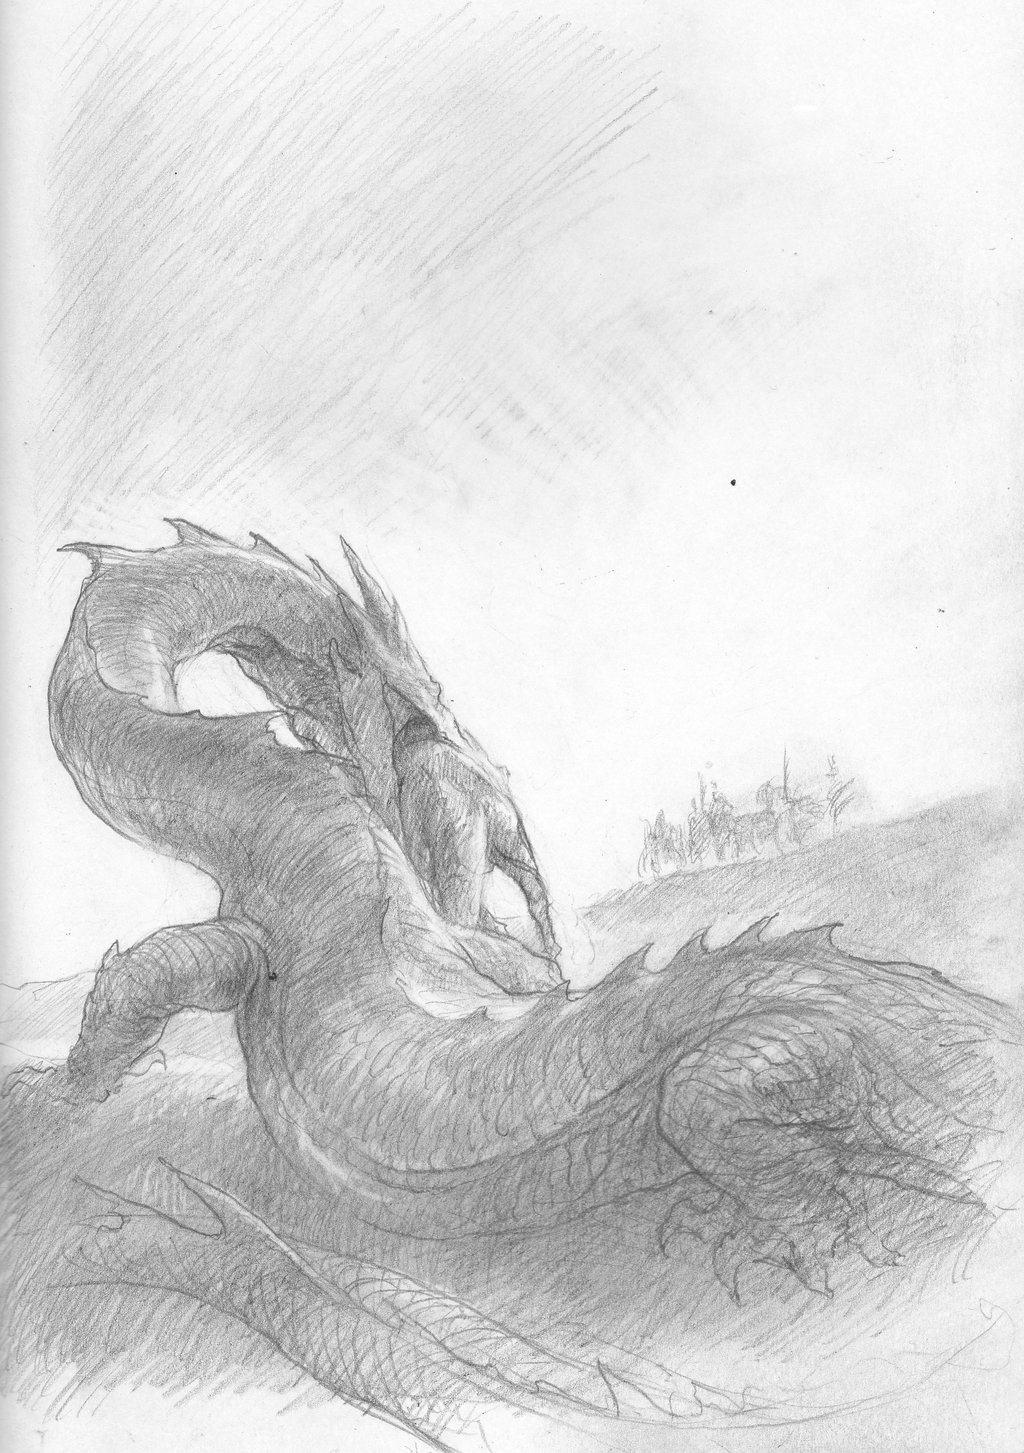 Fun Post: Scatha the Worm (Smaug's brother?) – A Tolkienist's Perspective